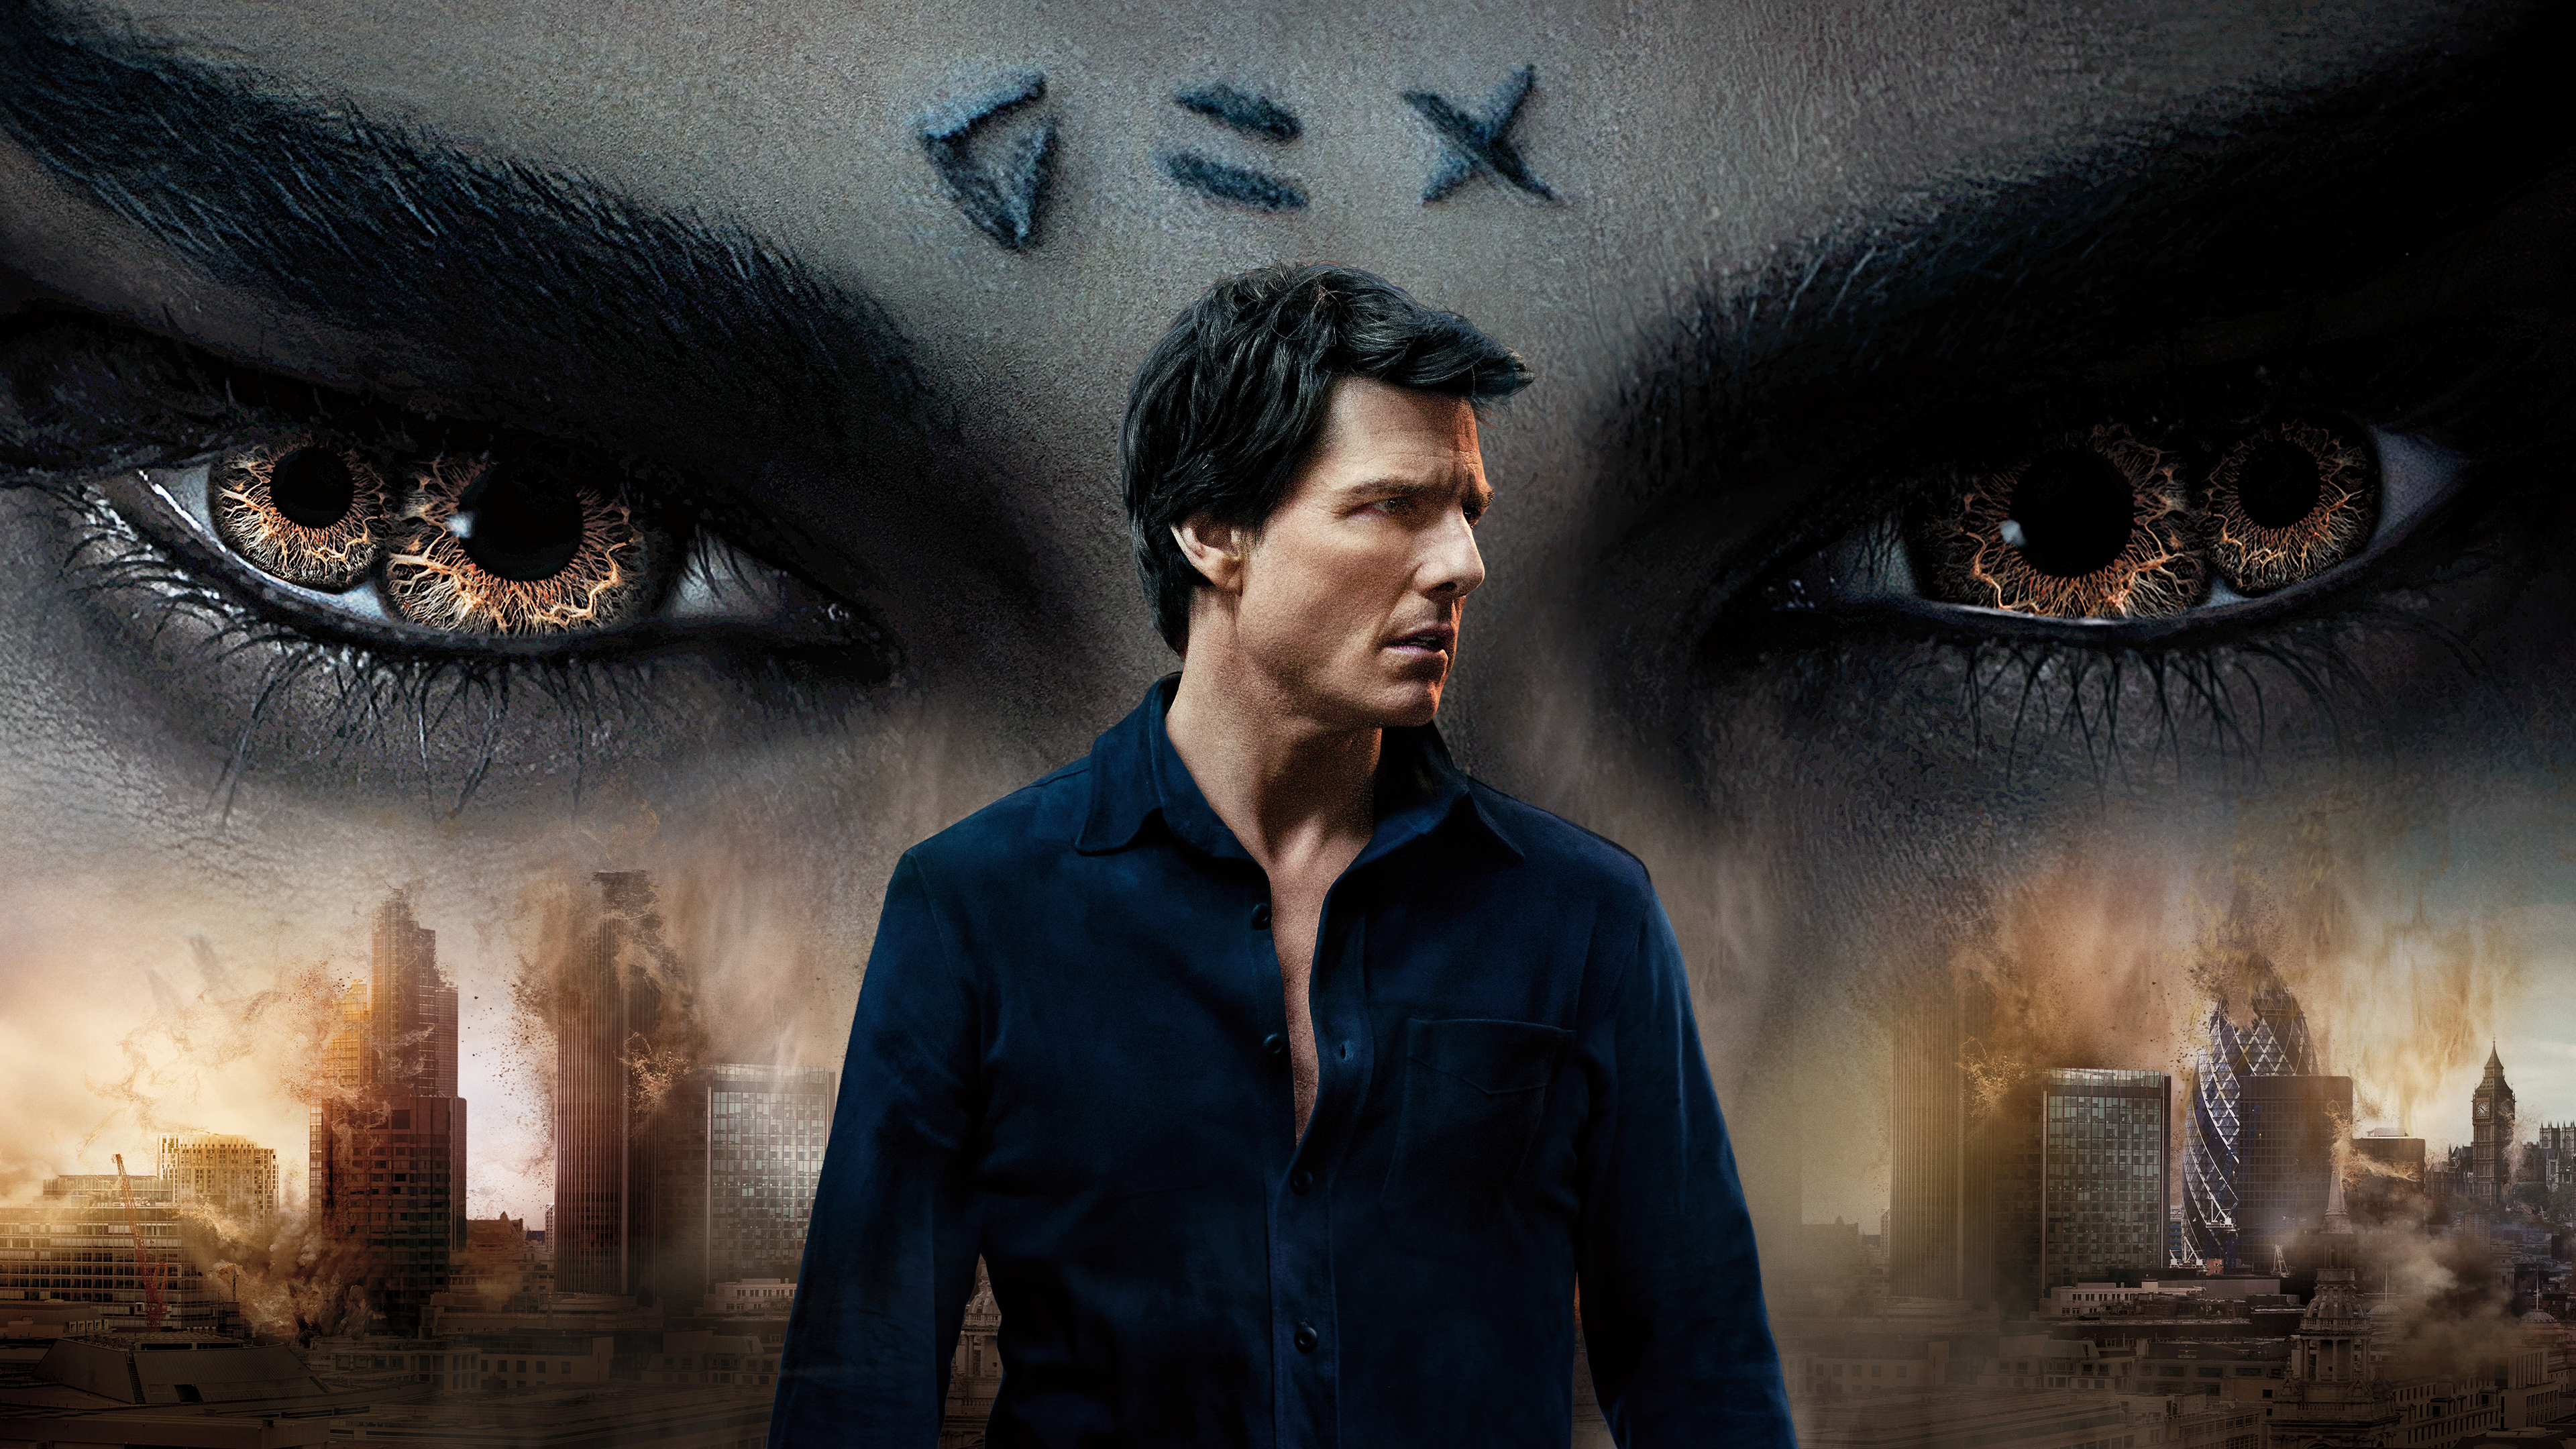 Tom Cruise The Mummy 2017 4K Wallpapers  HD Wallpapers  ID 20156